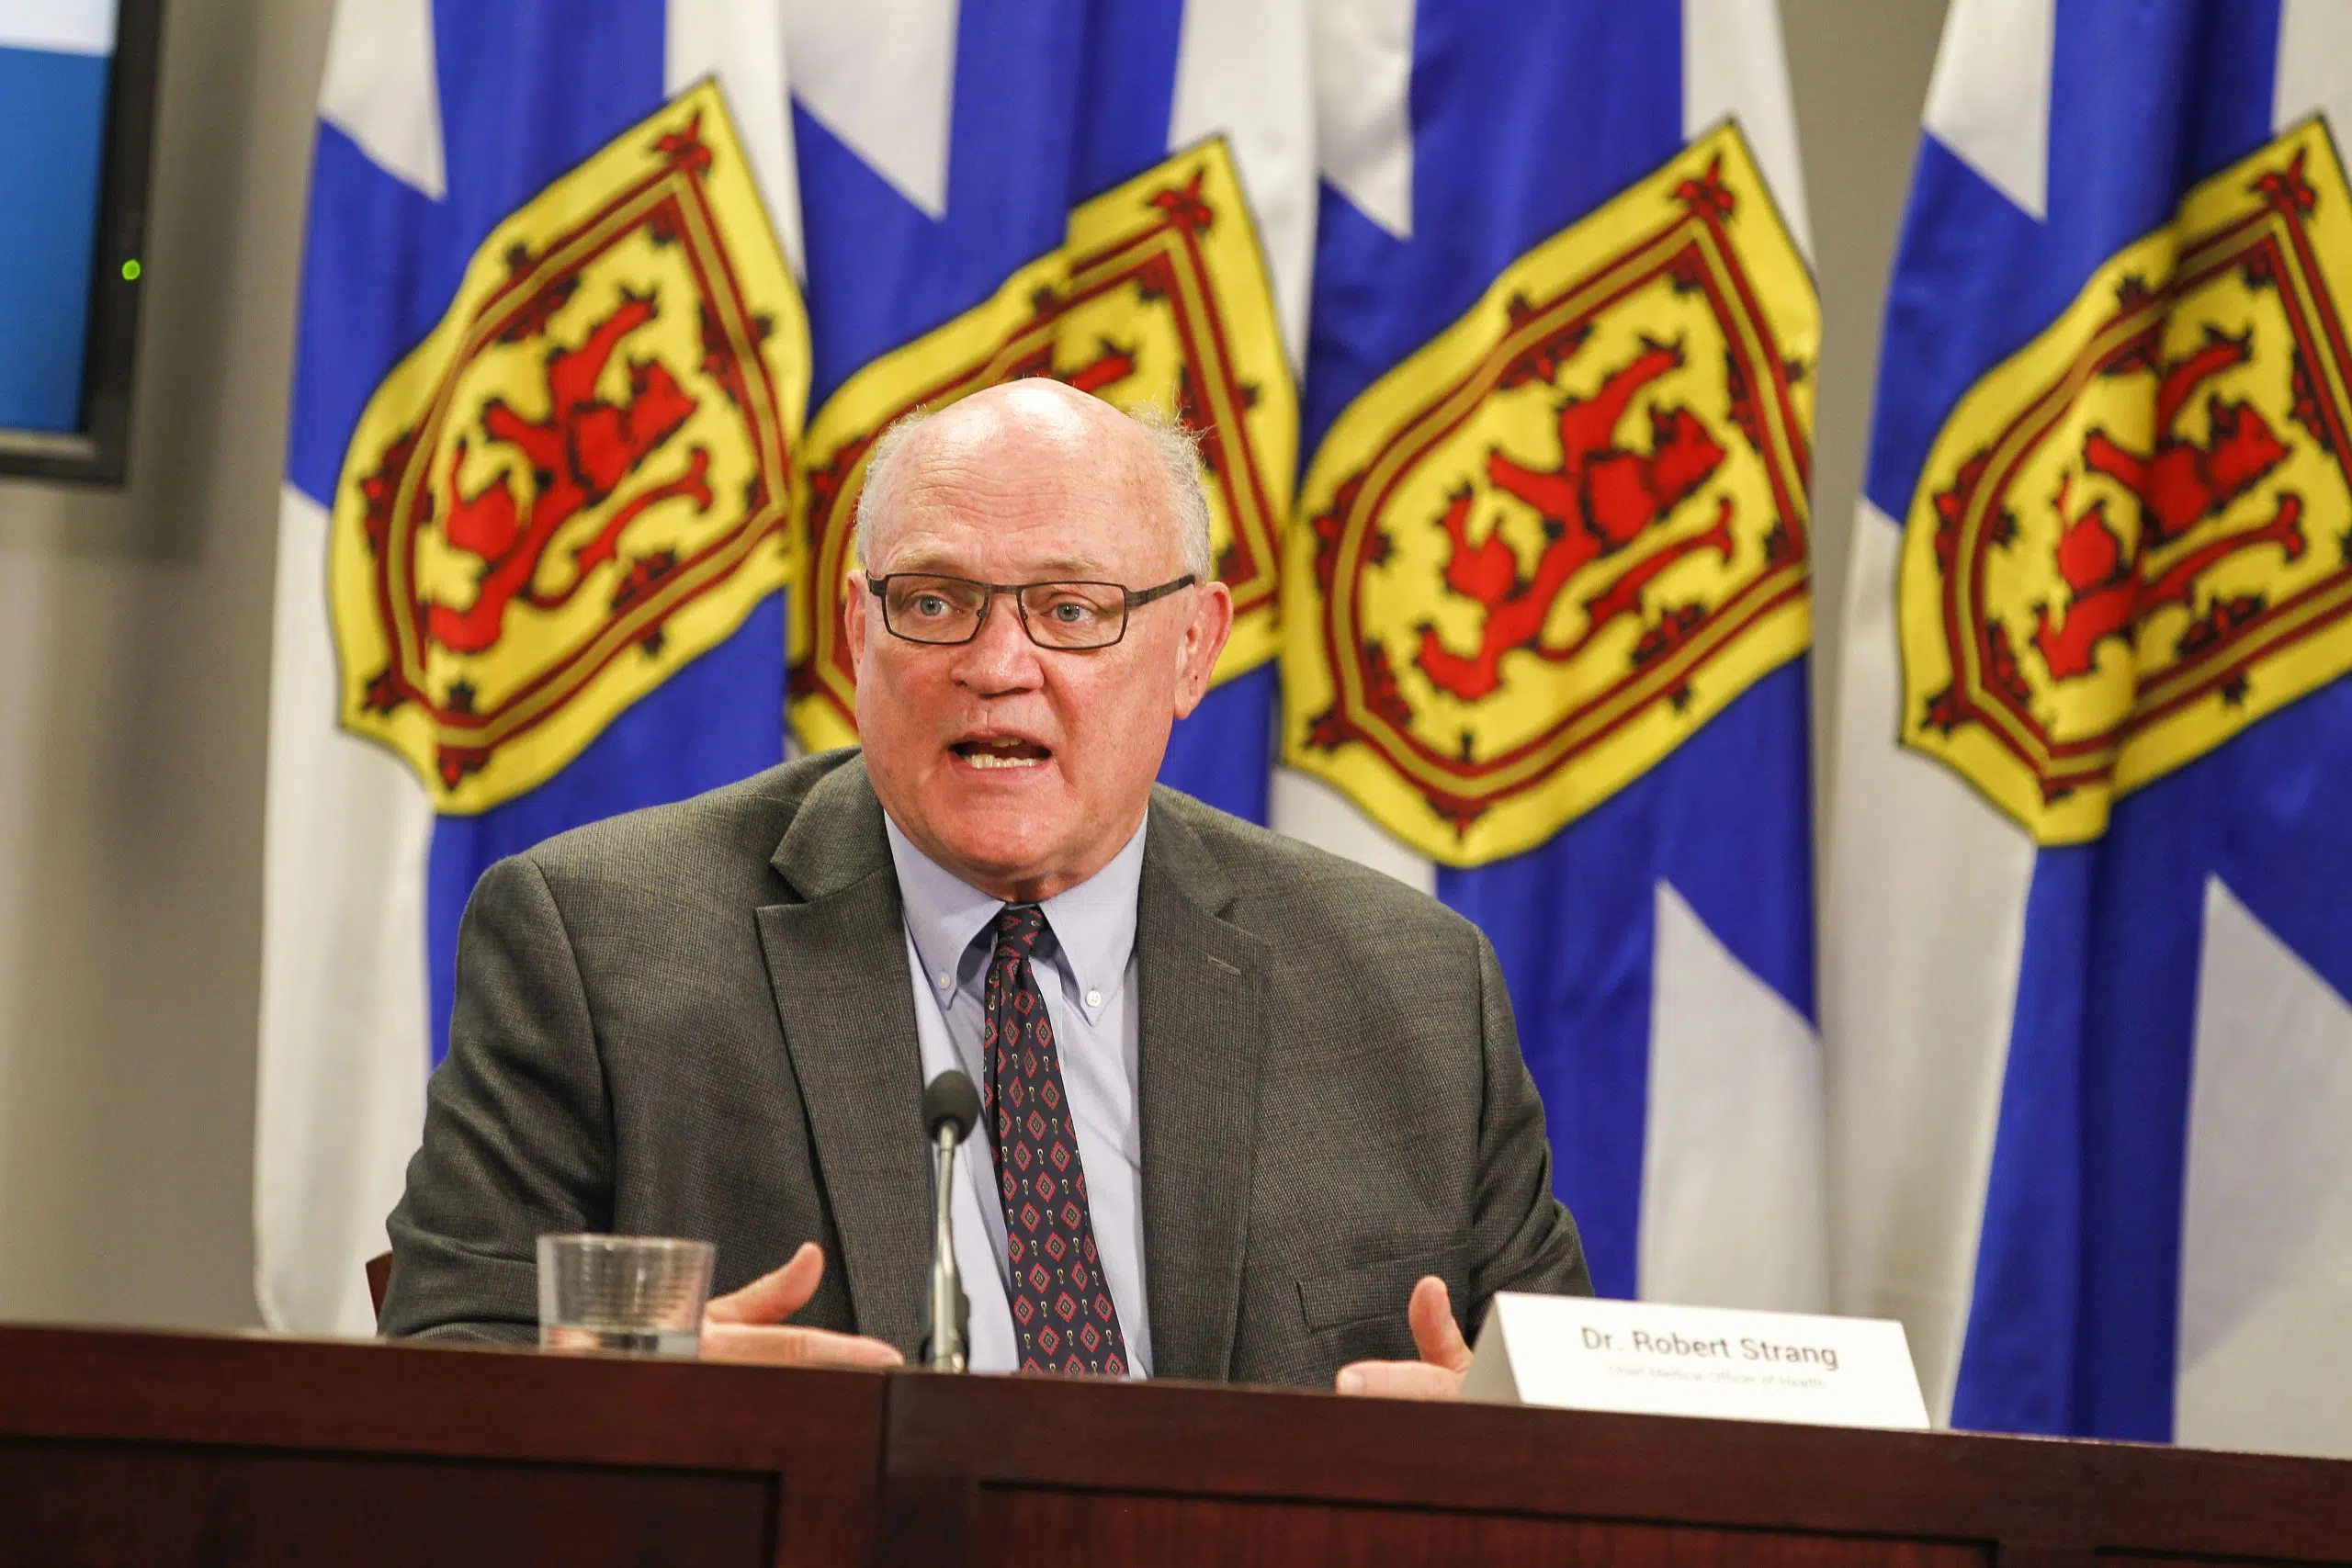 Nova Scotians to get COVID-19 update from premier, top doctor